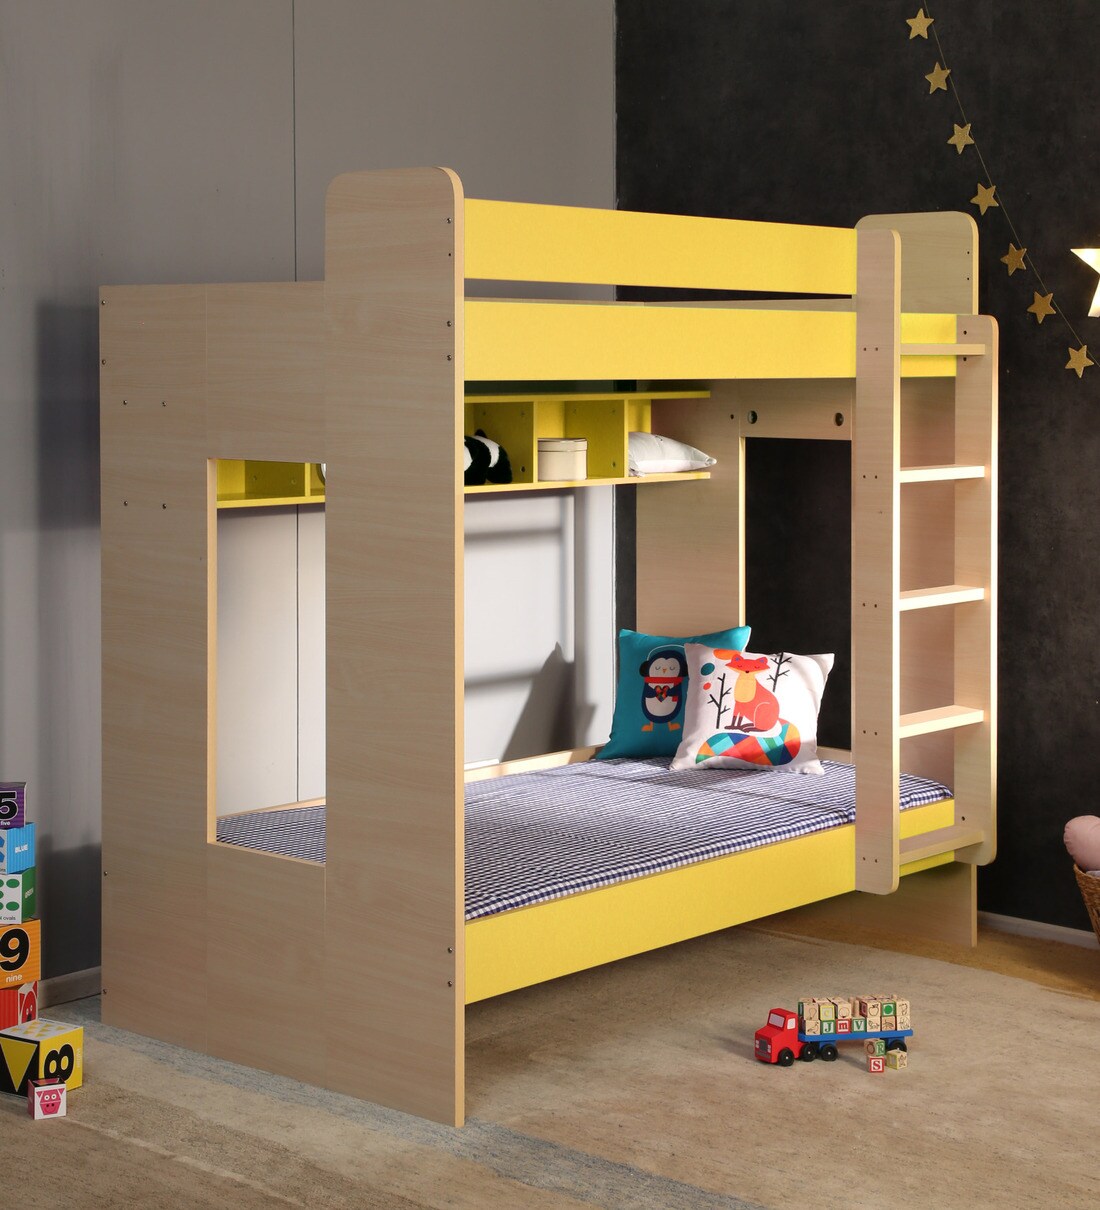 Buy Bunk Bed With Shelves In Yellow Colour By Yipi Online Online Standard Bunk Beds Bunk 0355